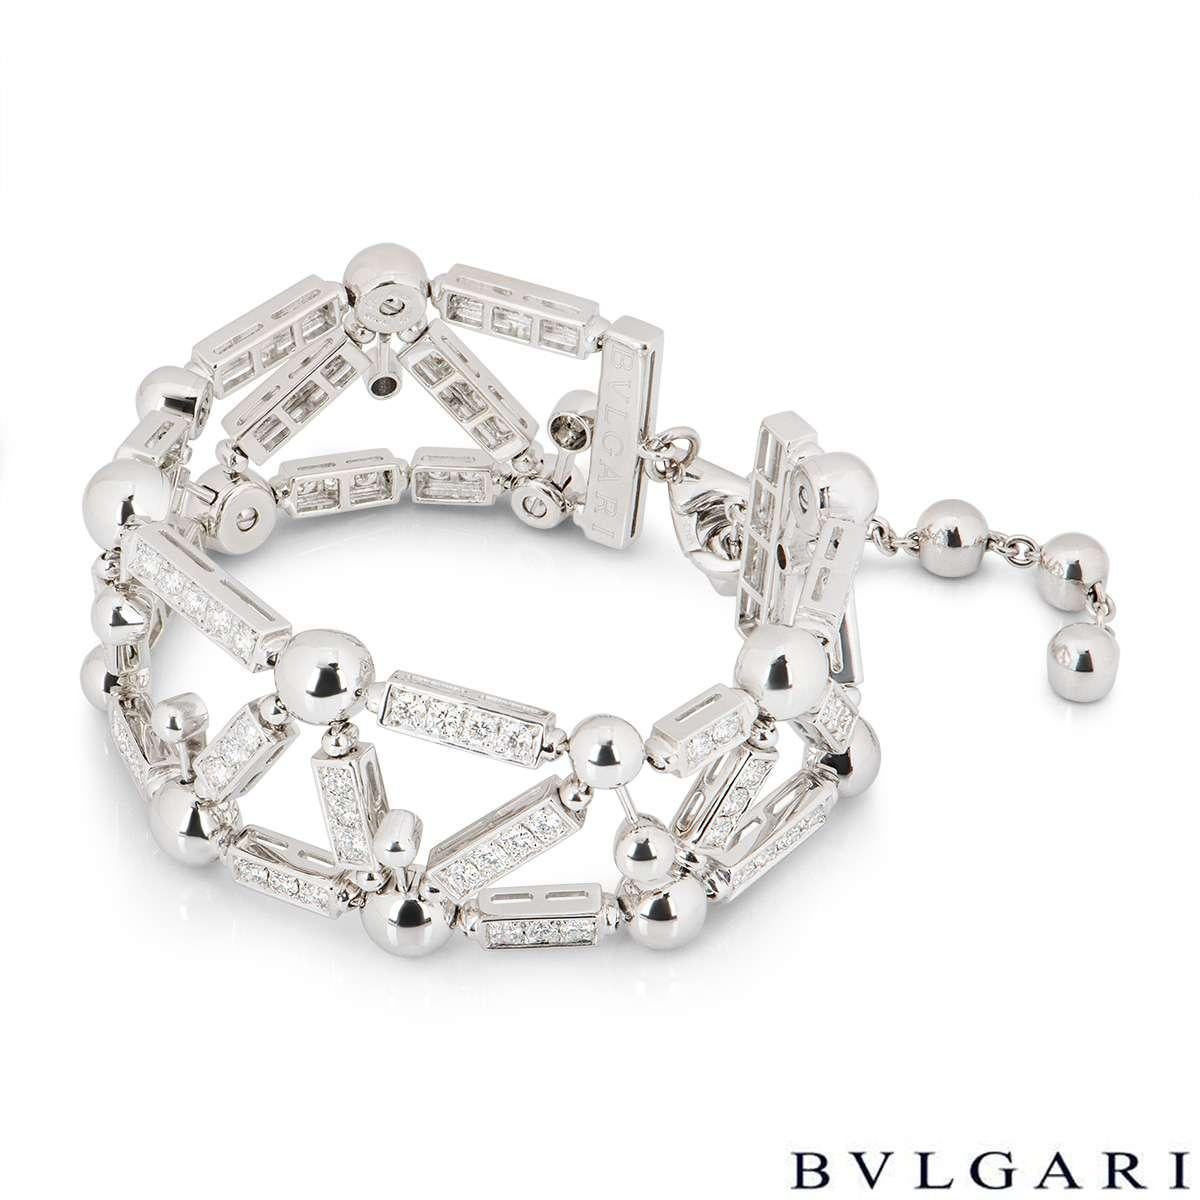 A stunning diamond set bracelet from The Fireworks collection by Bvlgari. The openwork link bracelet consists of rectangular bar links set with round brilliant cut diamonds. The links are each connected by a polished white gold ball link. The